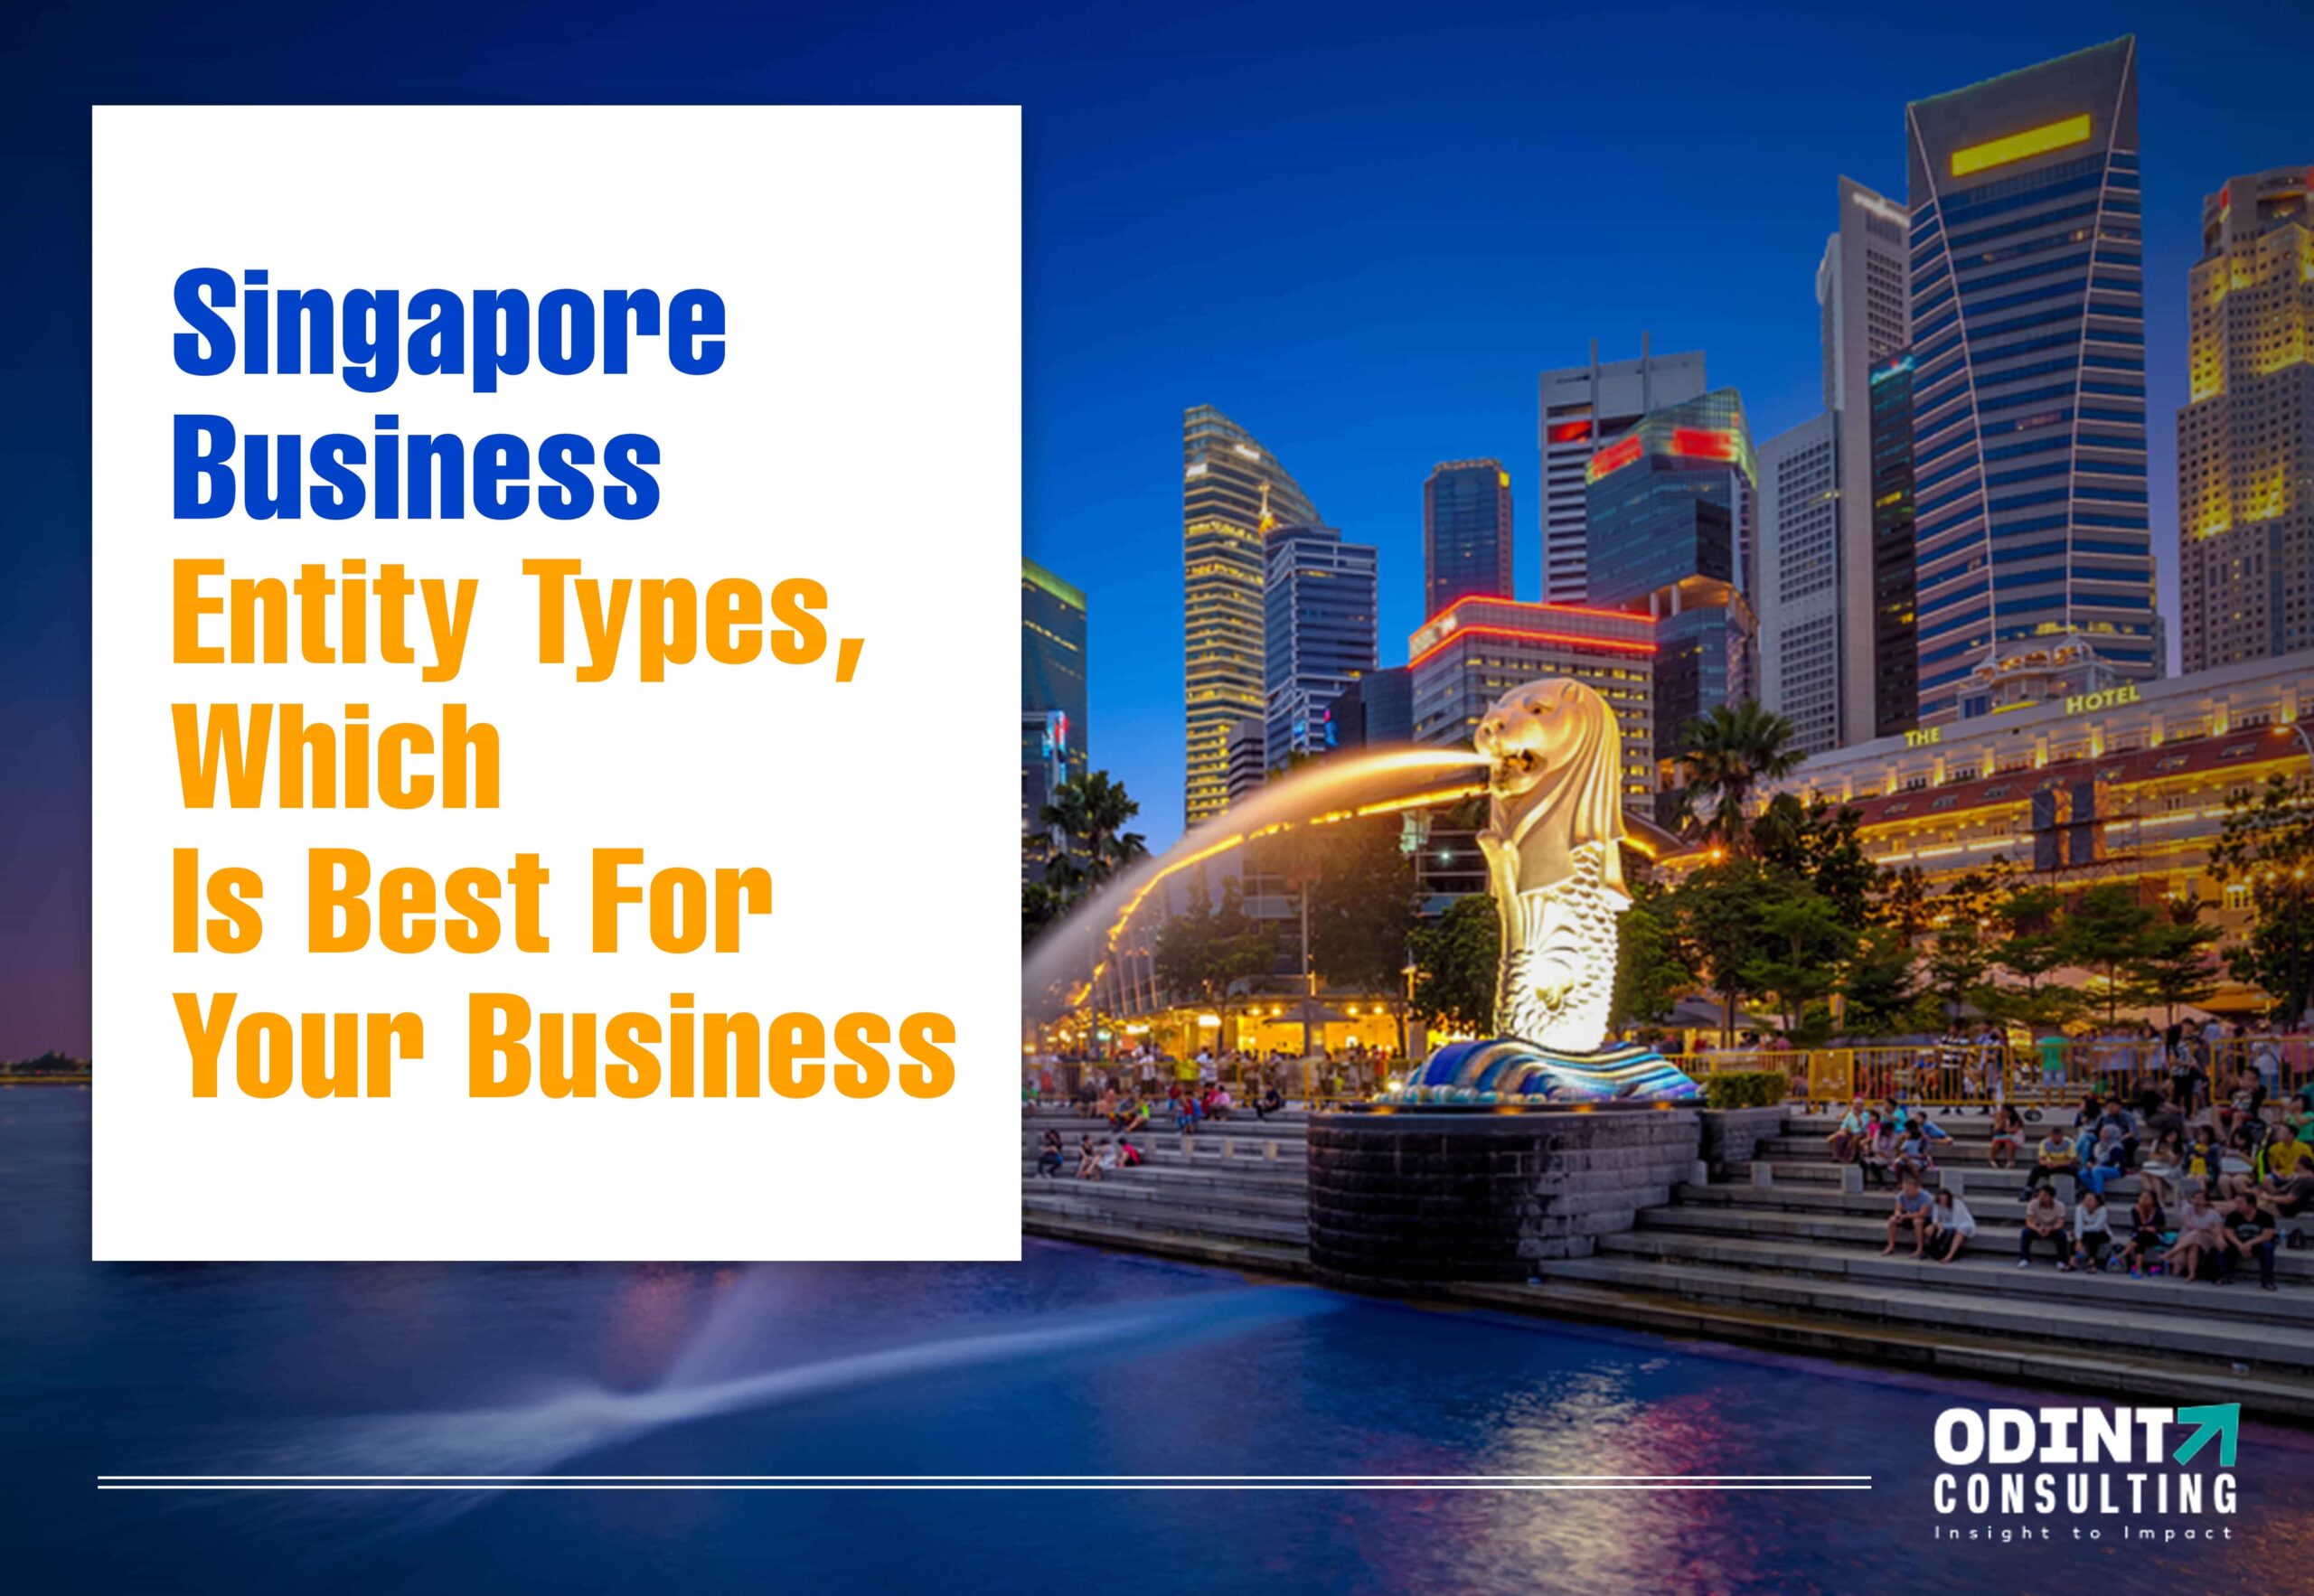 Types Of Business Entities In Singapore, Which Is Best For Your Business?